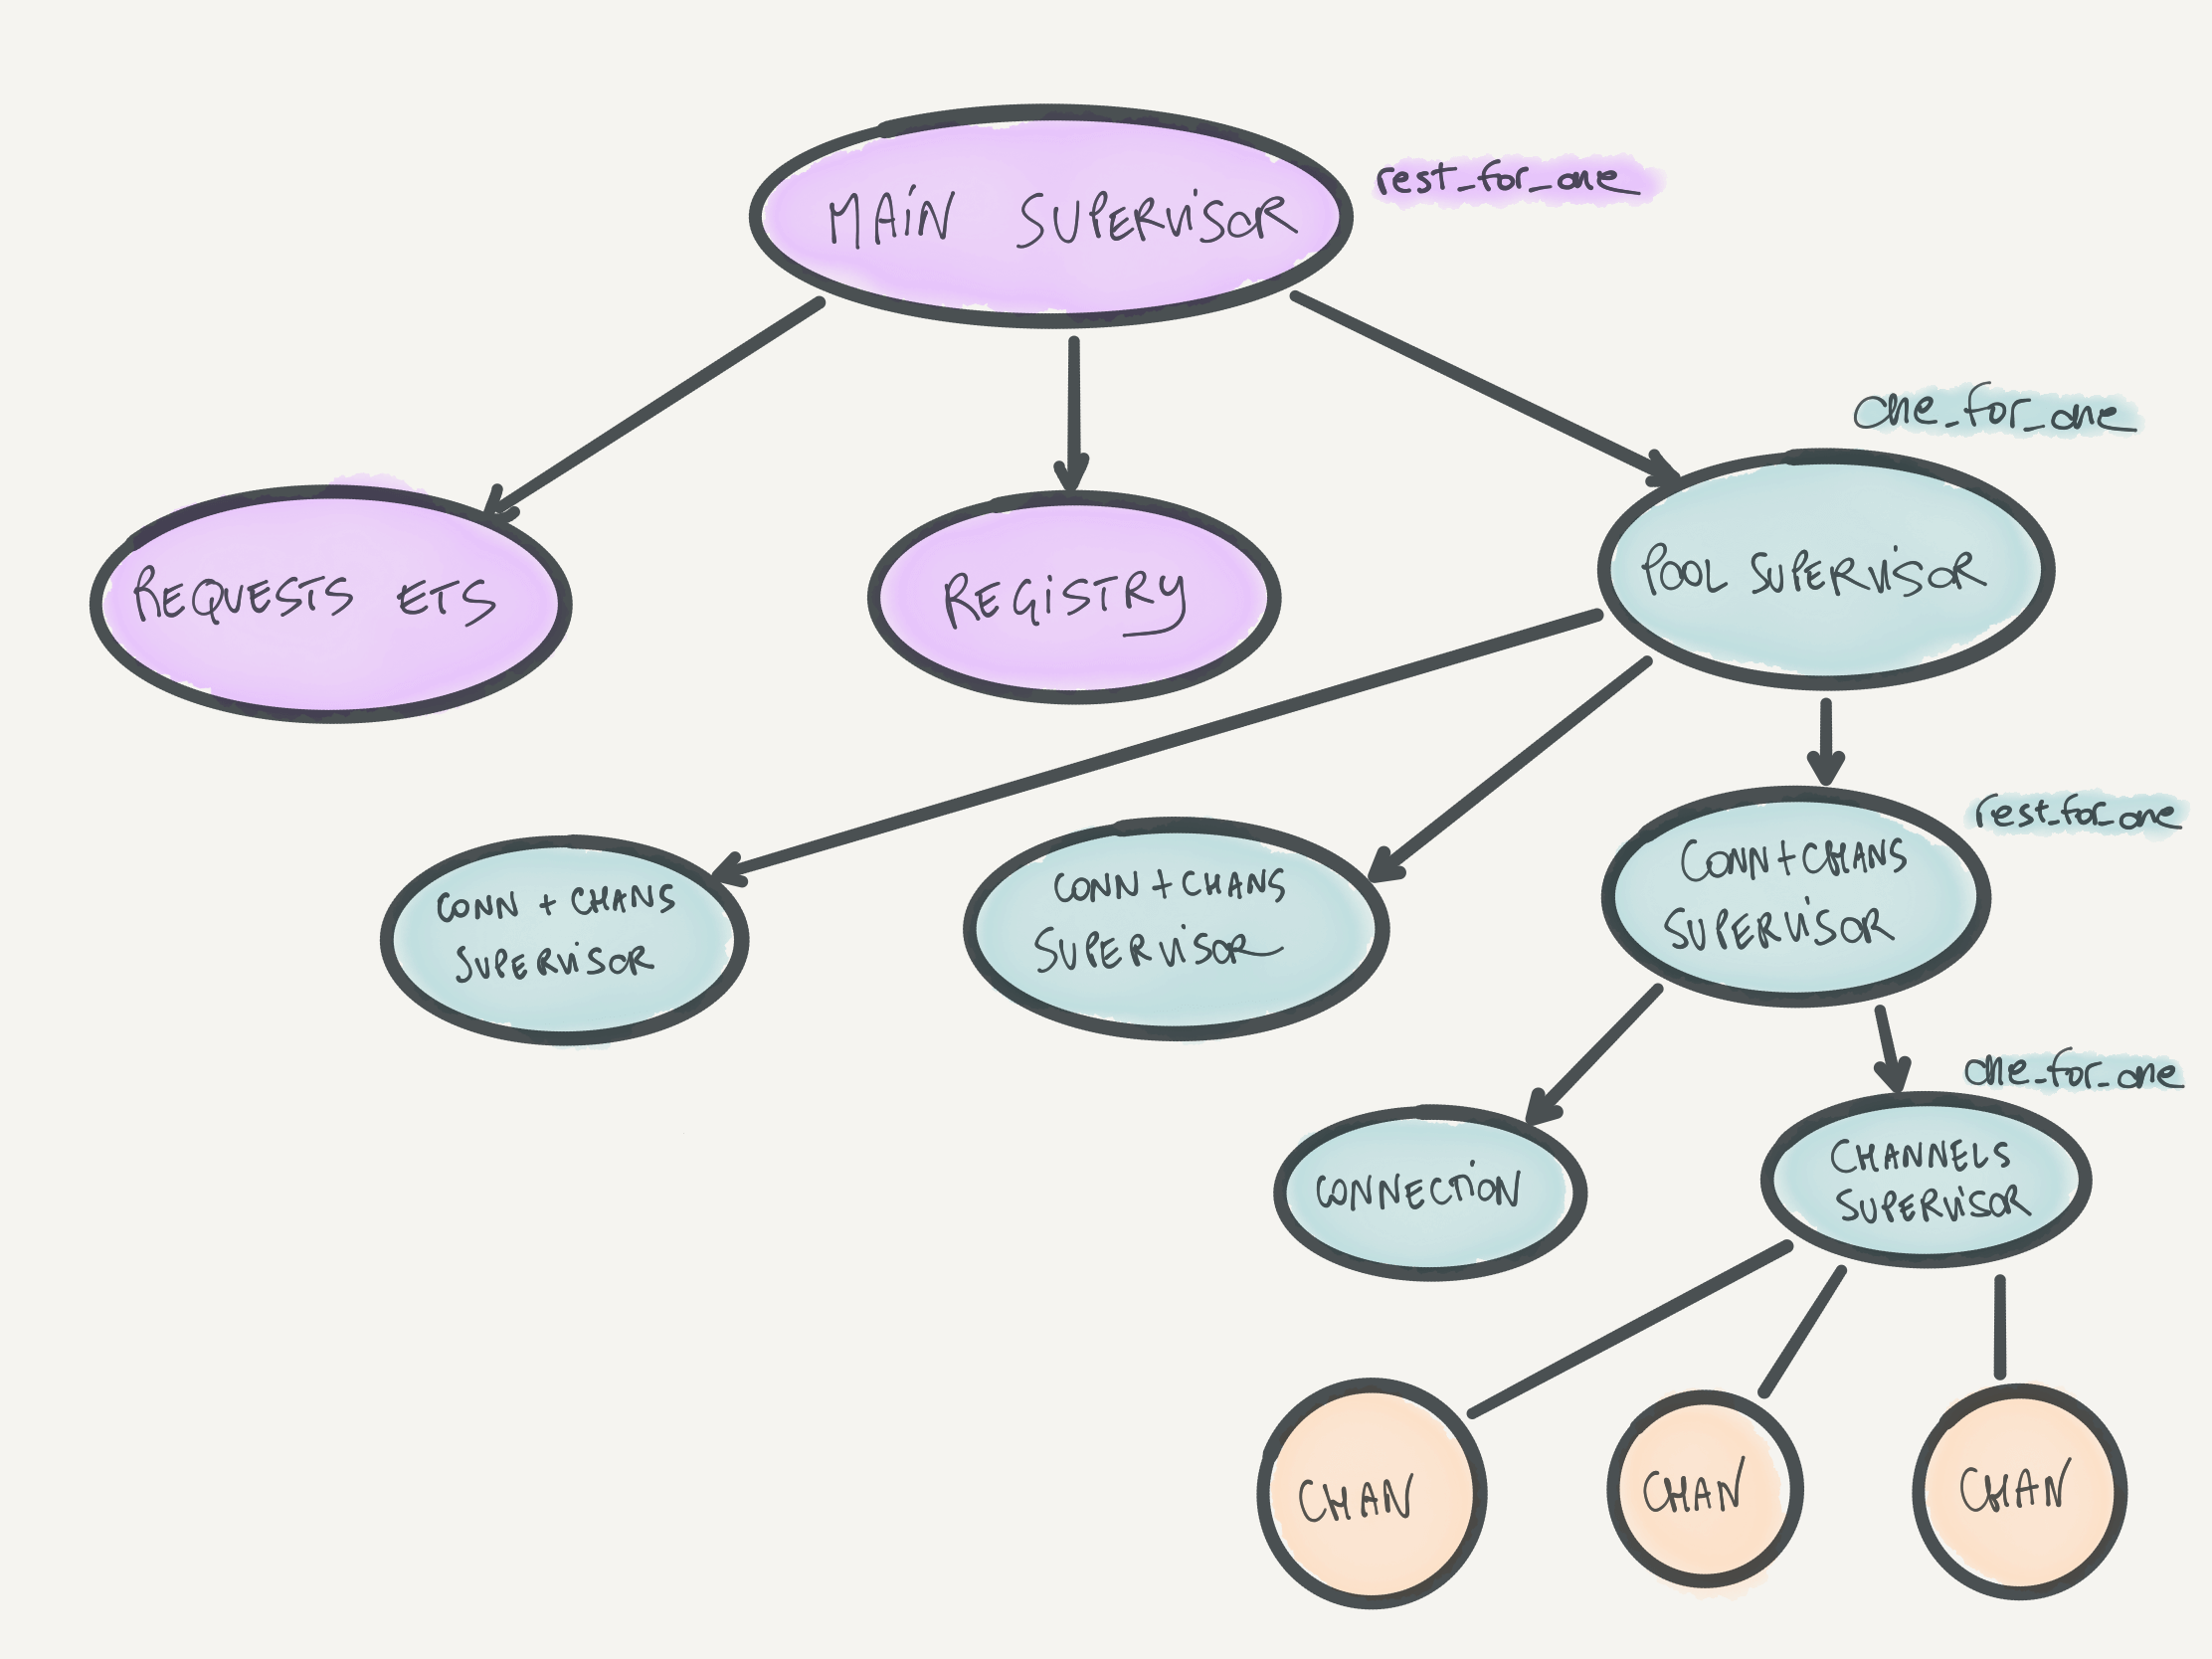 Sketch of the supervision tree